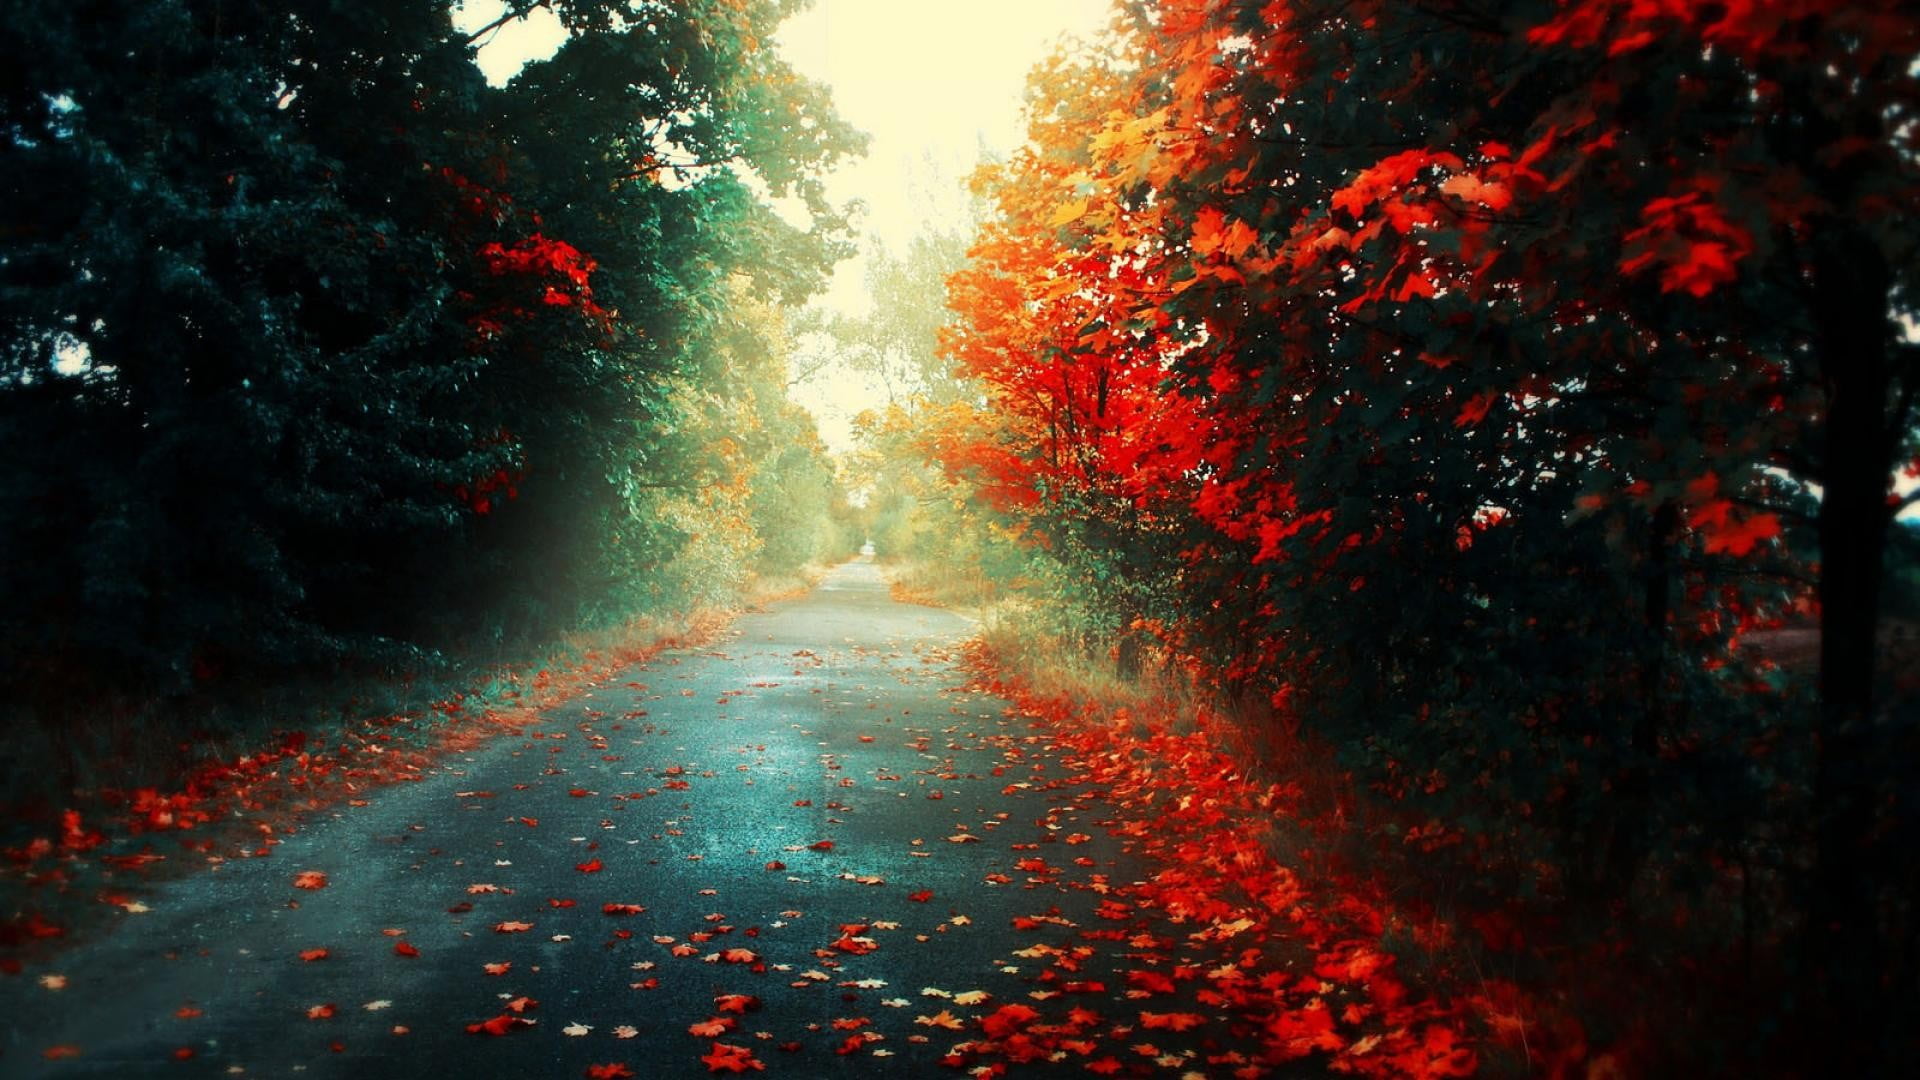 red petaled tree, fall, colorful, nature, road, trees, landscape